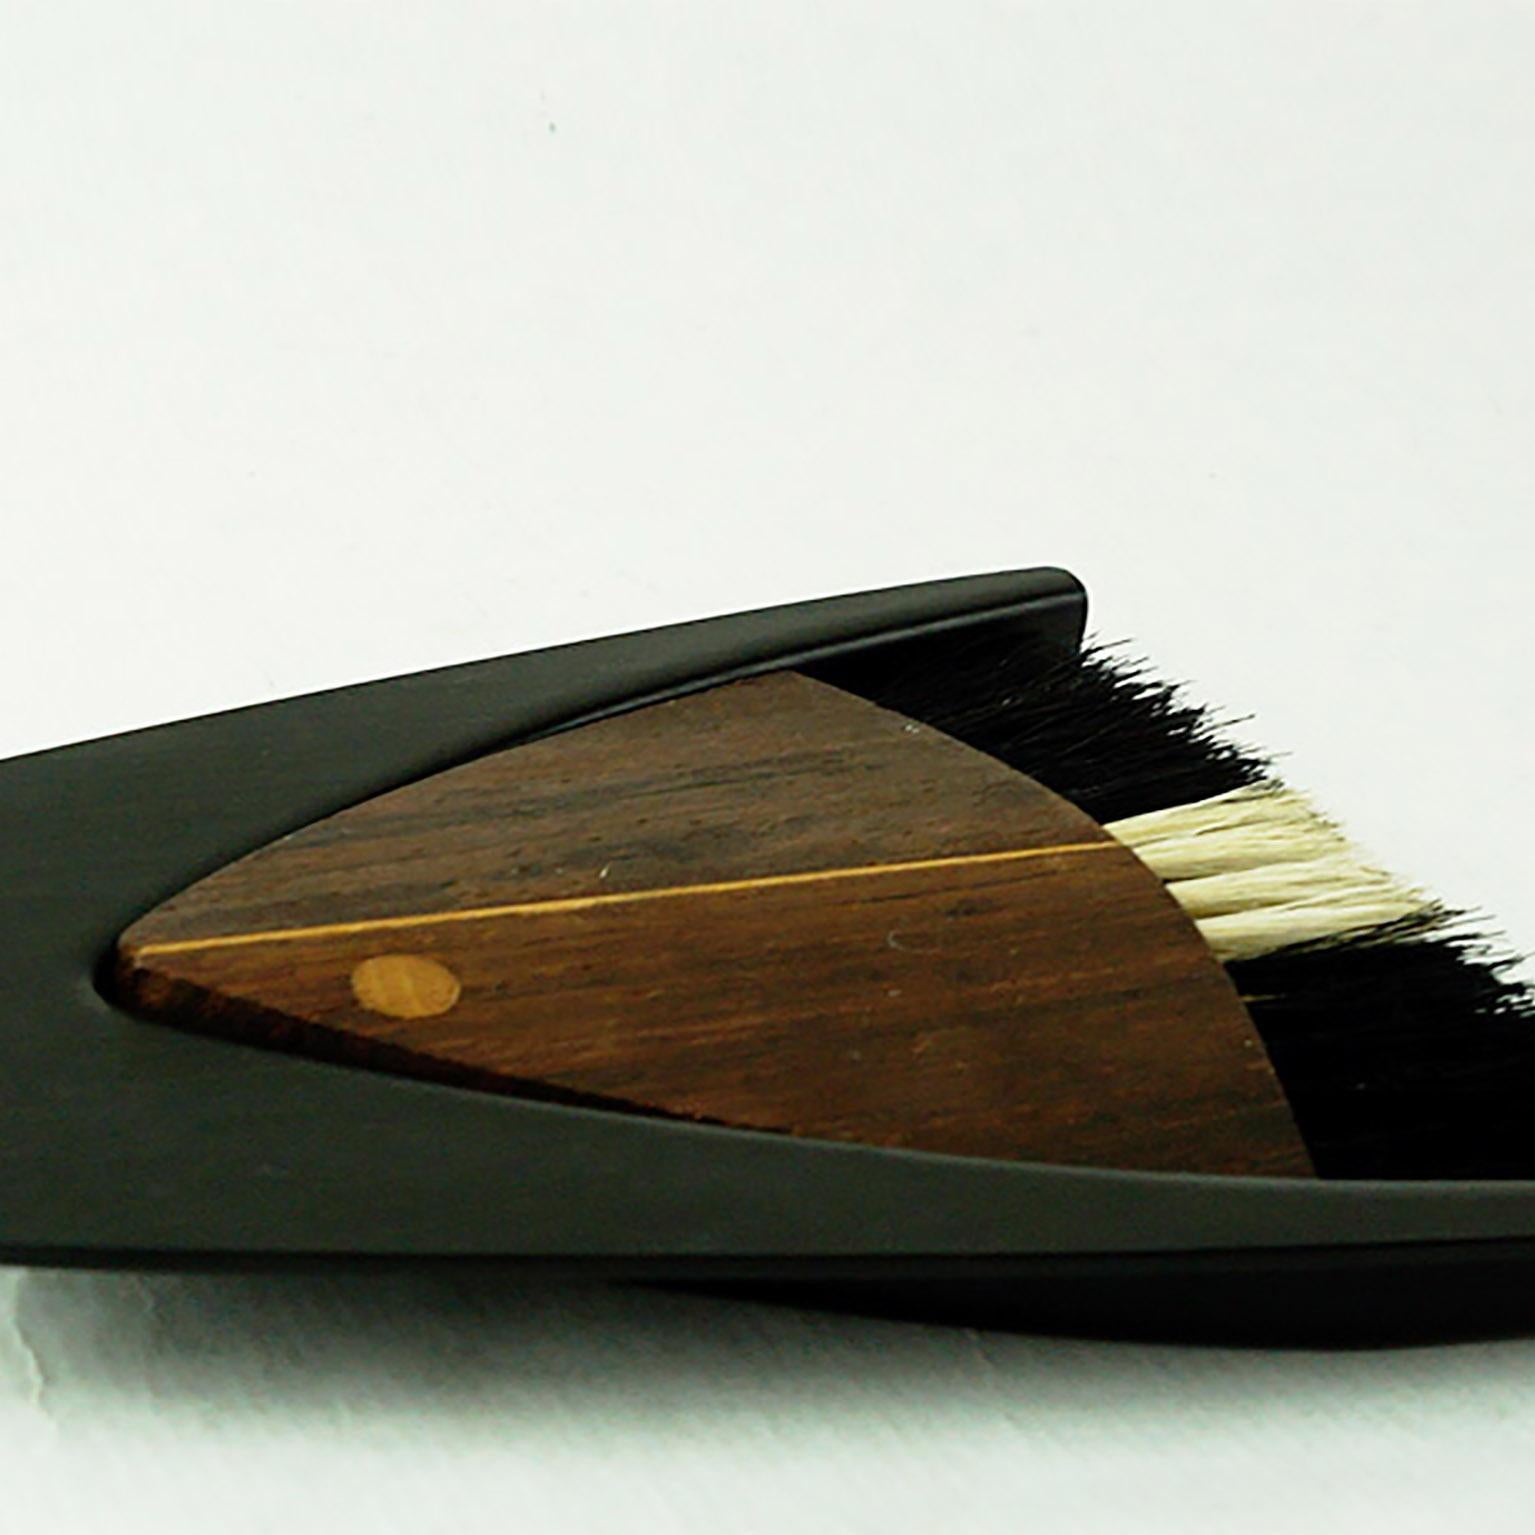 This amazing Danish midcentury rosewood fish shaped crumb sweeper or table brush was designed by Laurids Lonborg.
It features graphical pure design and excellent handcrafted inlays in beautiful condition.

 